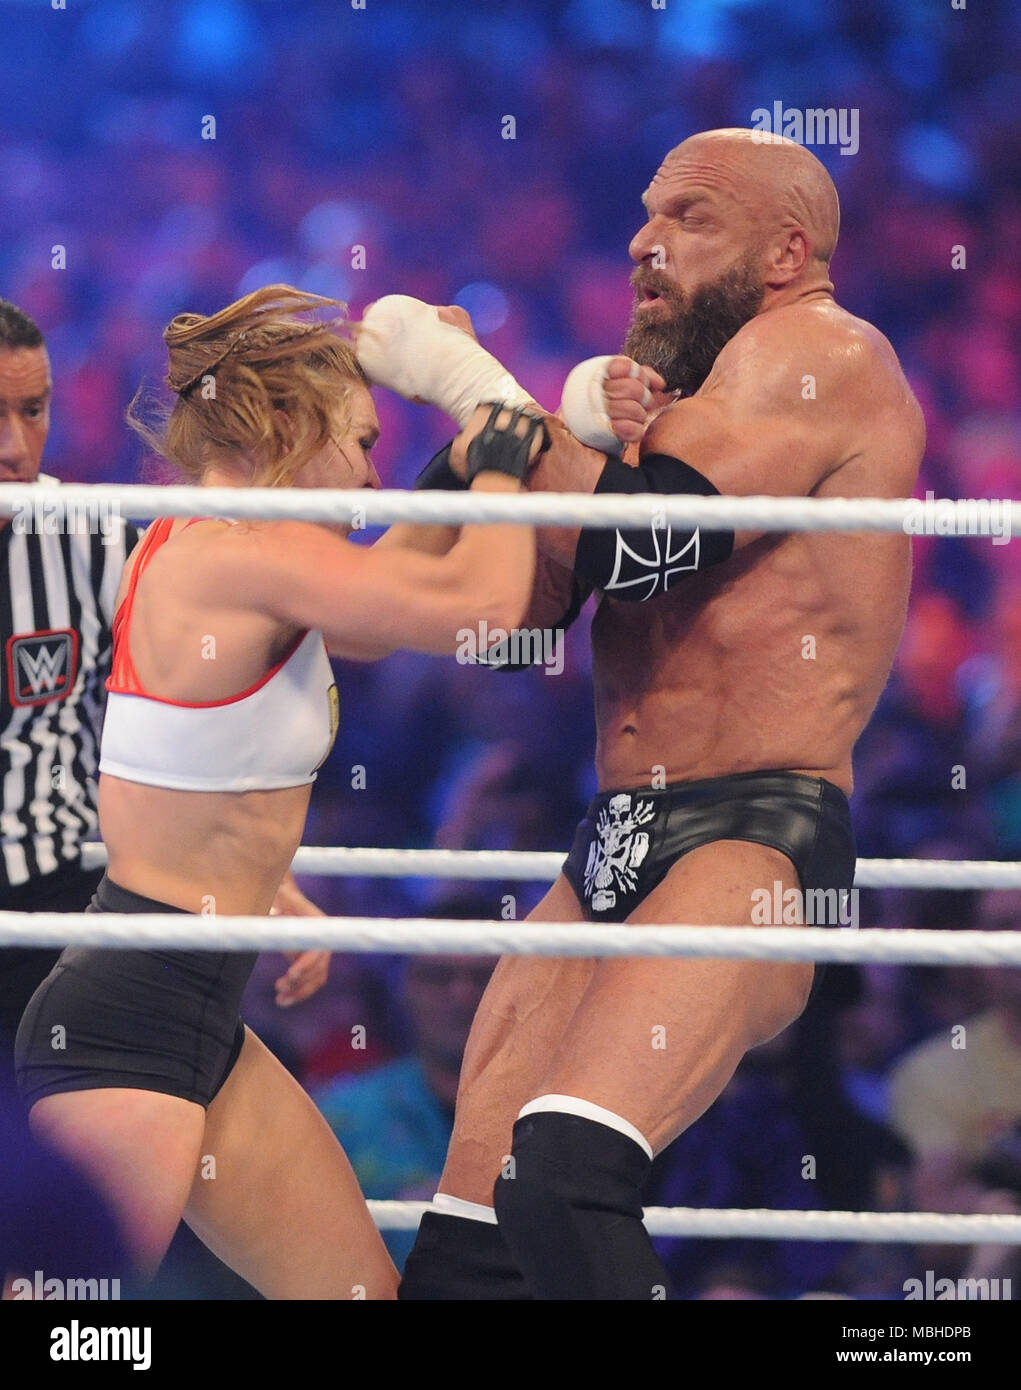 New Orleans, LA, USA. 8th Apr, 2018. Ronda Rousey and Triple H at WWE Wrestlemania 34 at the Mercedes-Benz Superdome in New Orleans, Louisiana on April 8, 2018. Credit: George Napolitano/Media Punch/Alamy Live News Stock Photo